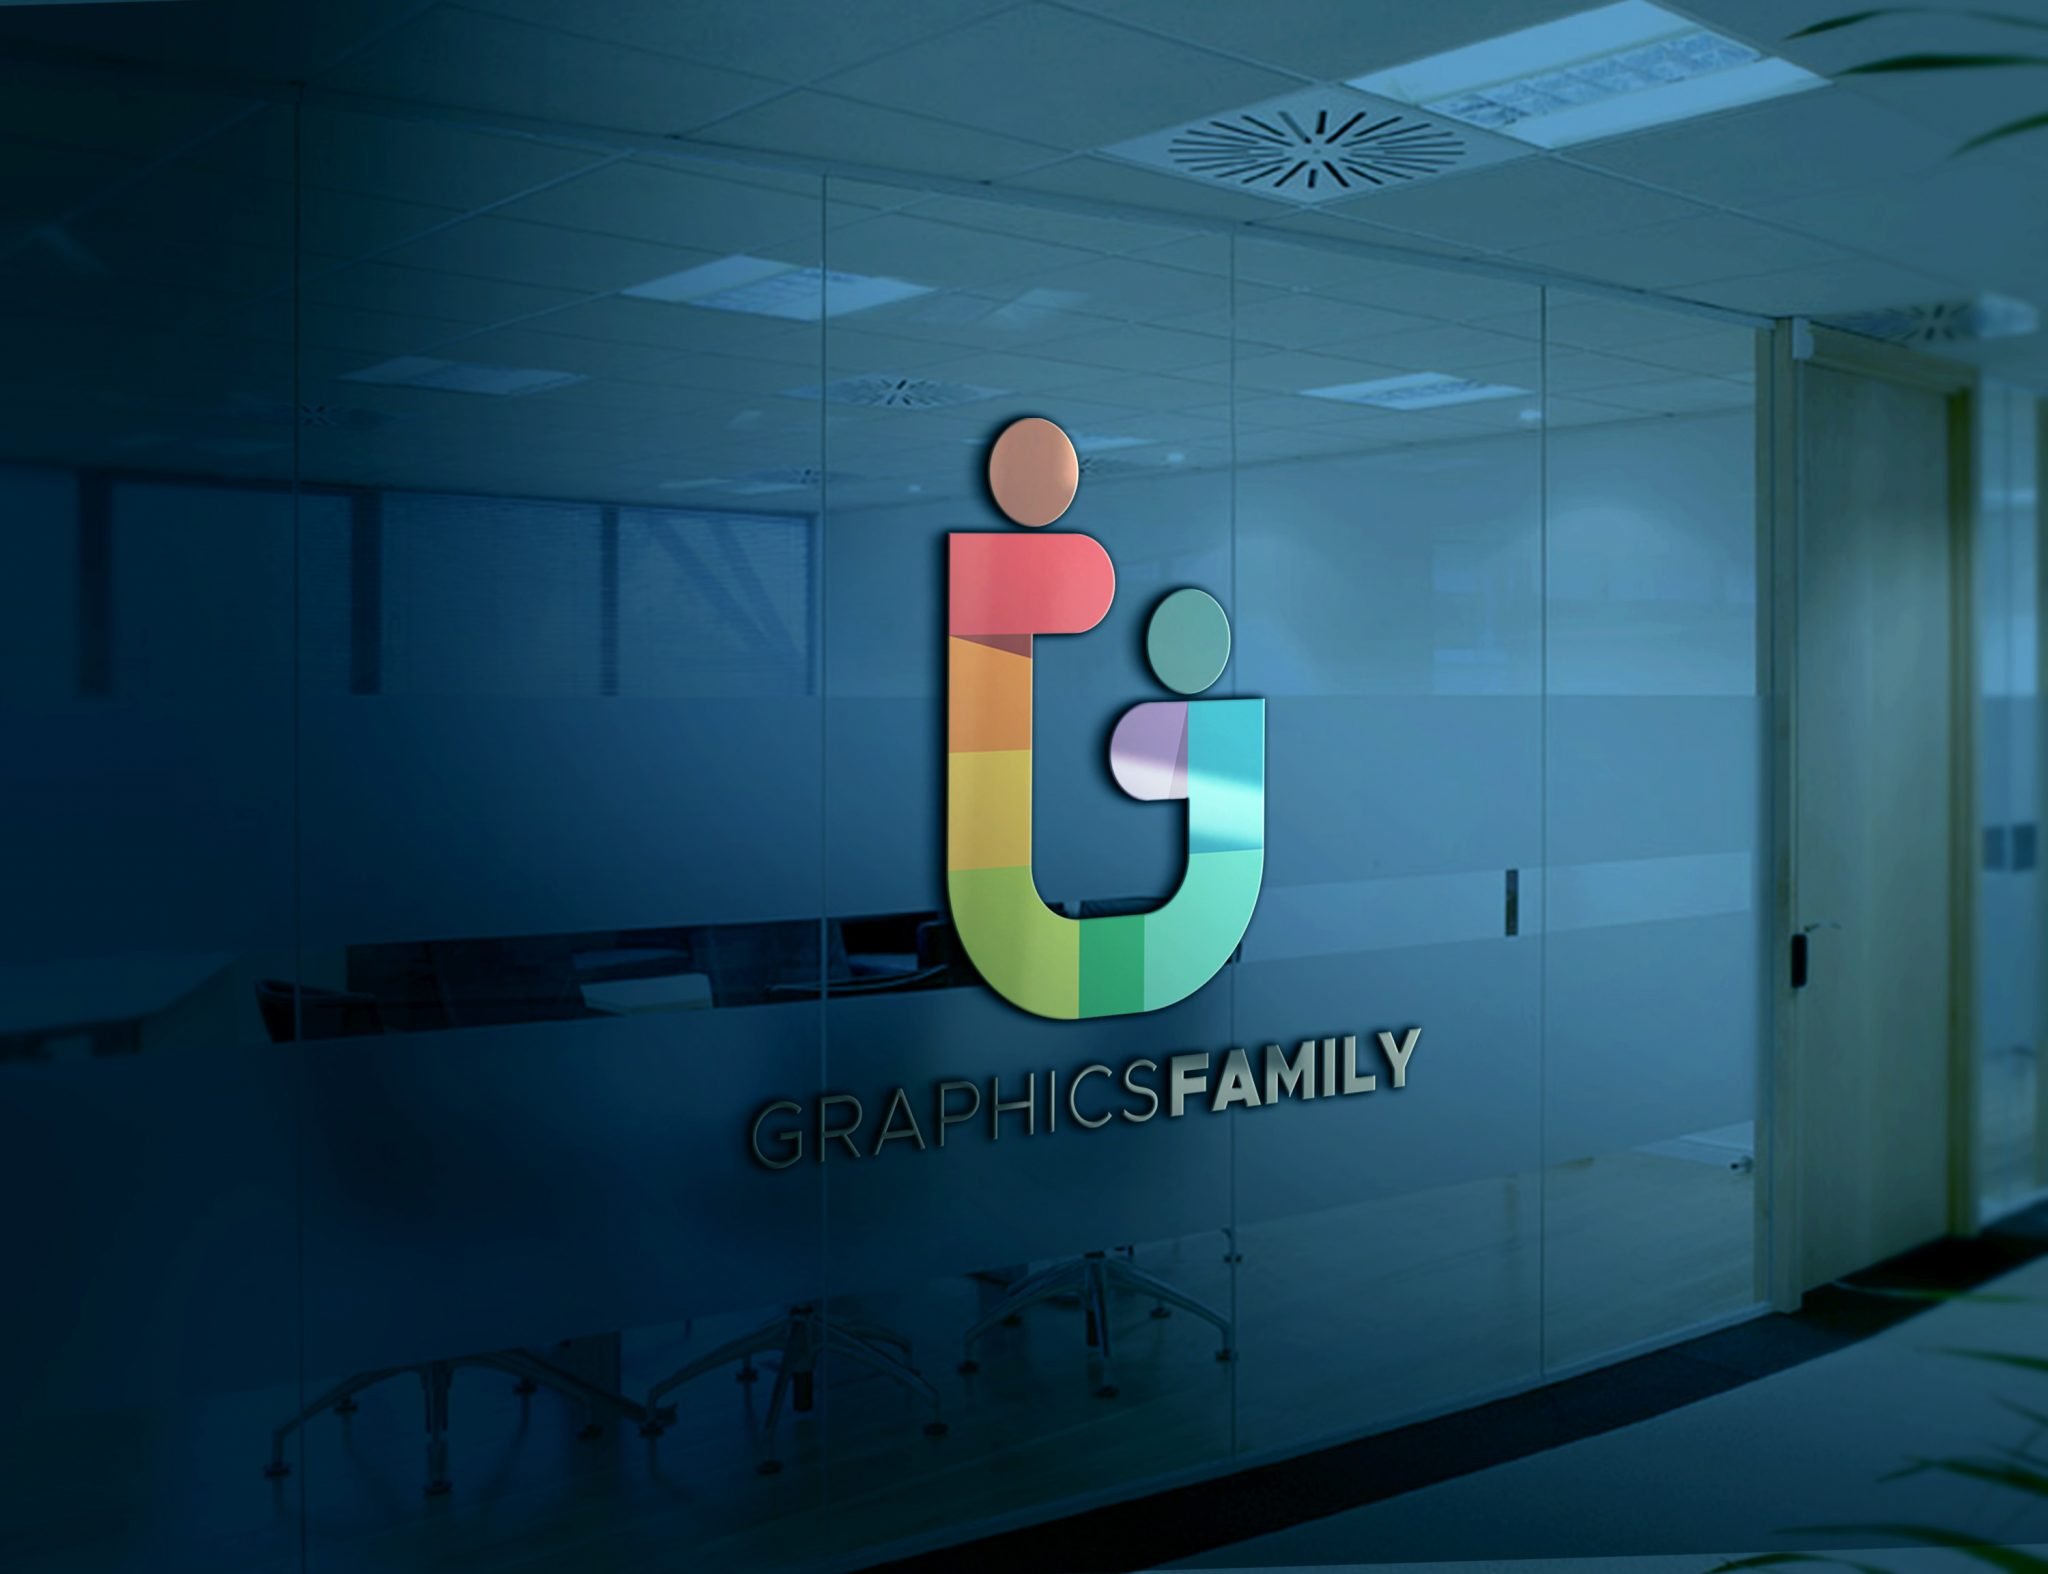 Free PSD Logo Mockup on Office Glass Wall GraphicsFamily